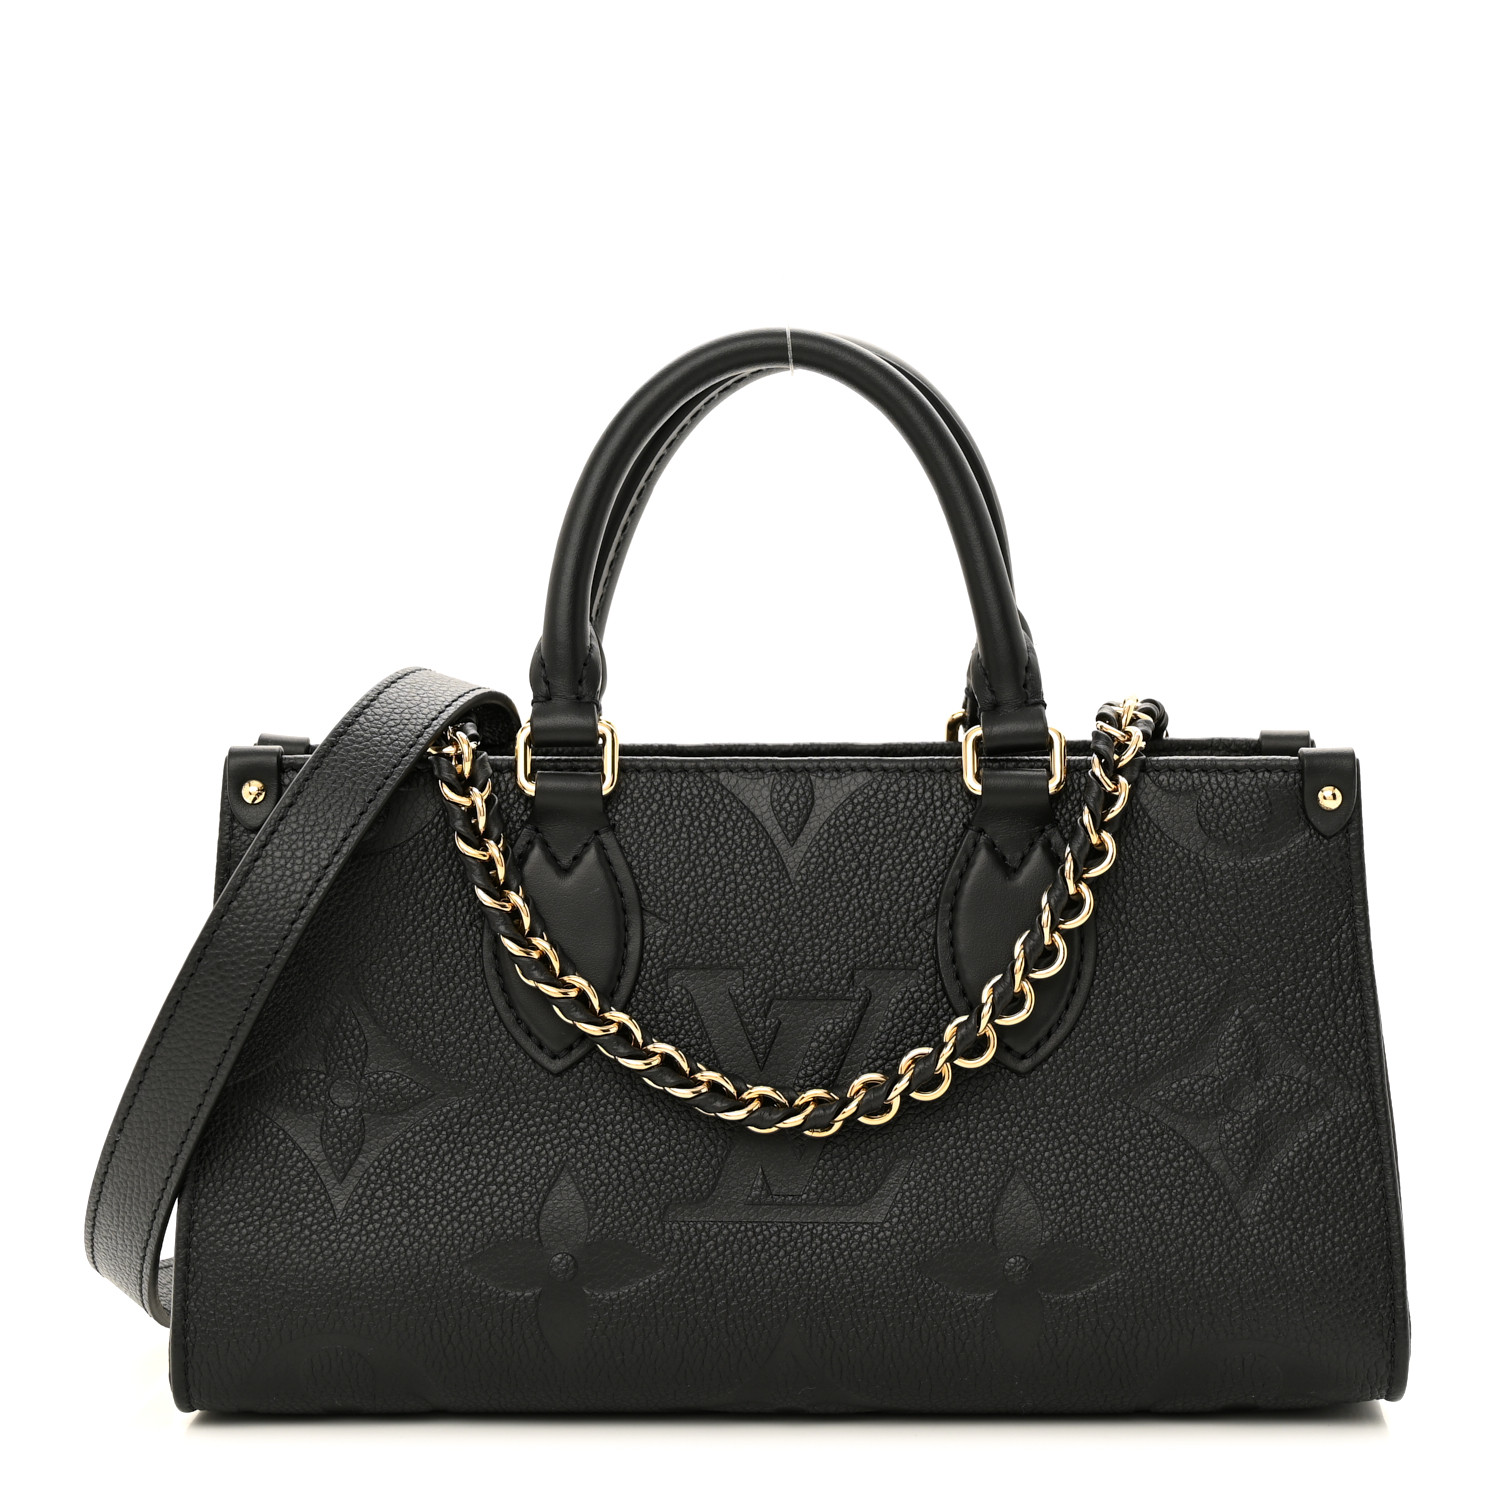 LOUIS VUITTON Empreinte OnTheGo East West in the color Black by FASHIONPHILE